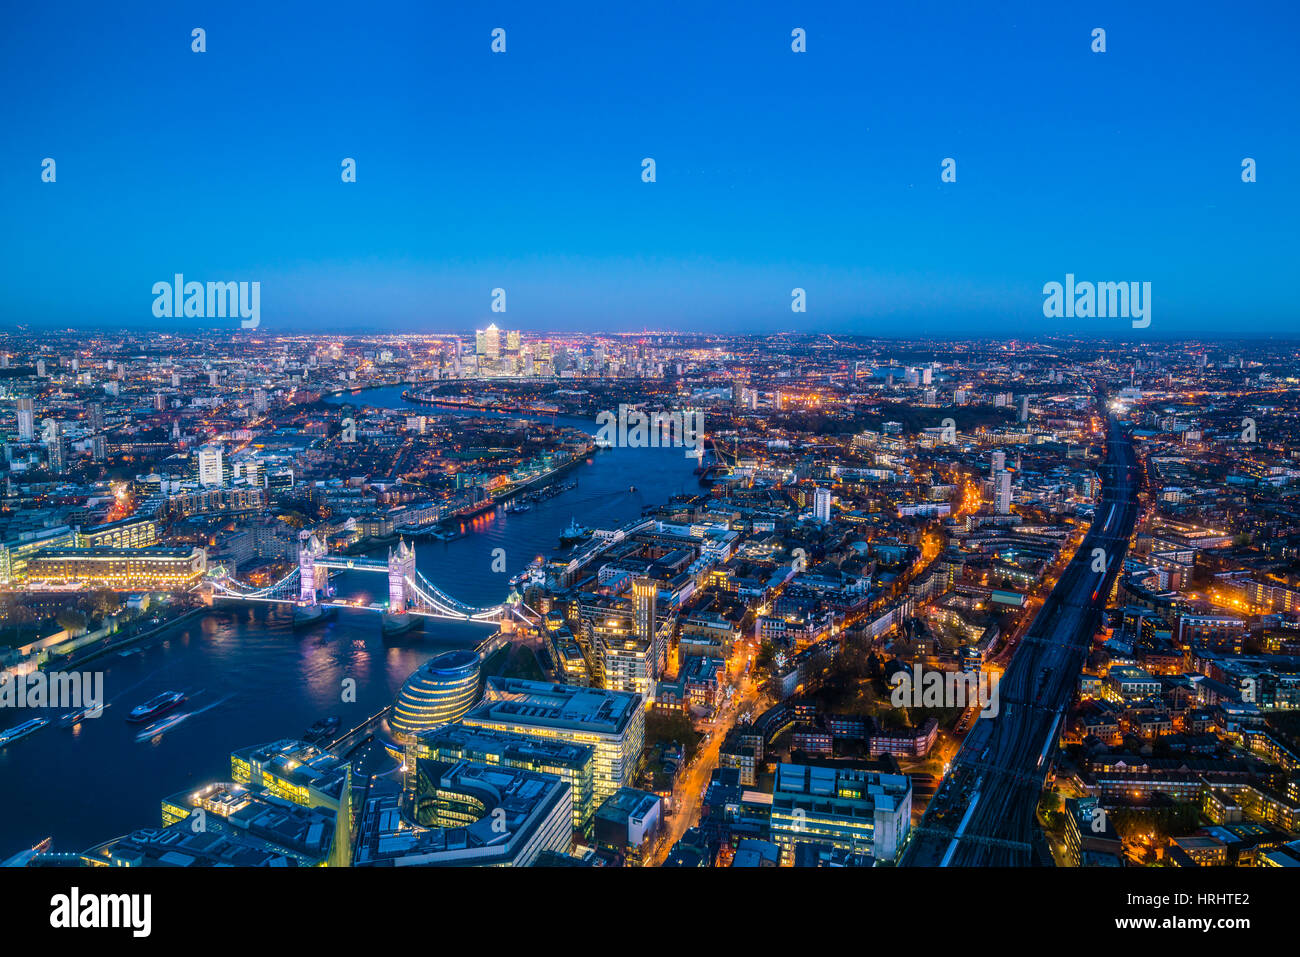 High view of London skyline at dusk along the River Thames from Tower Bridge to Canary Wharf, London, England, United Kingdom Stock Photo